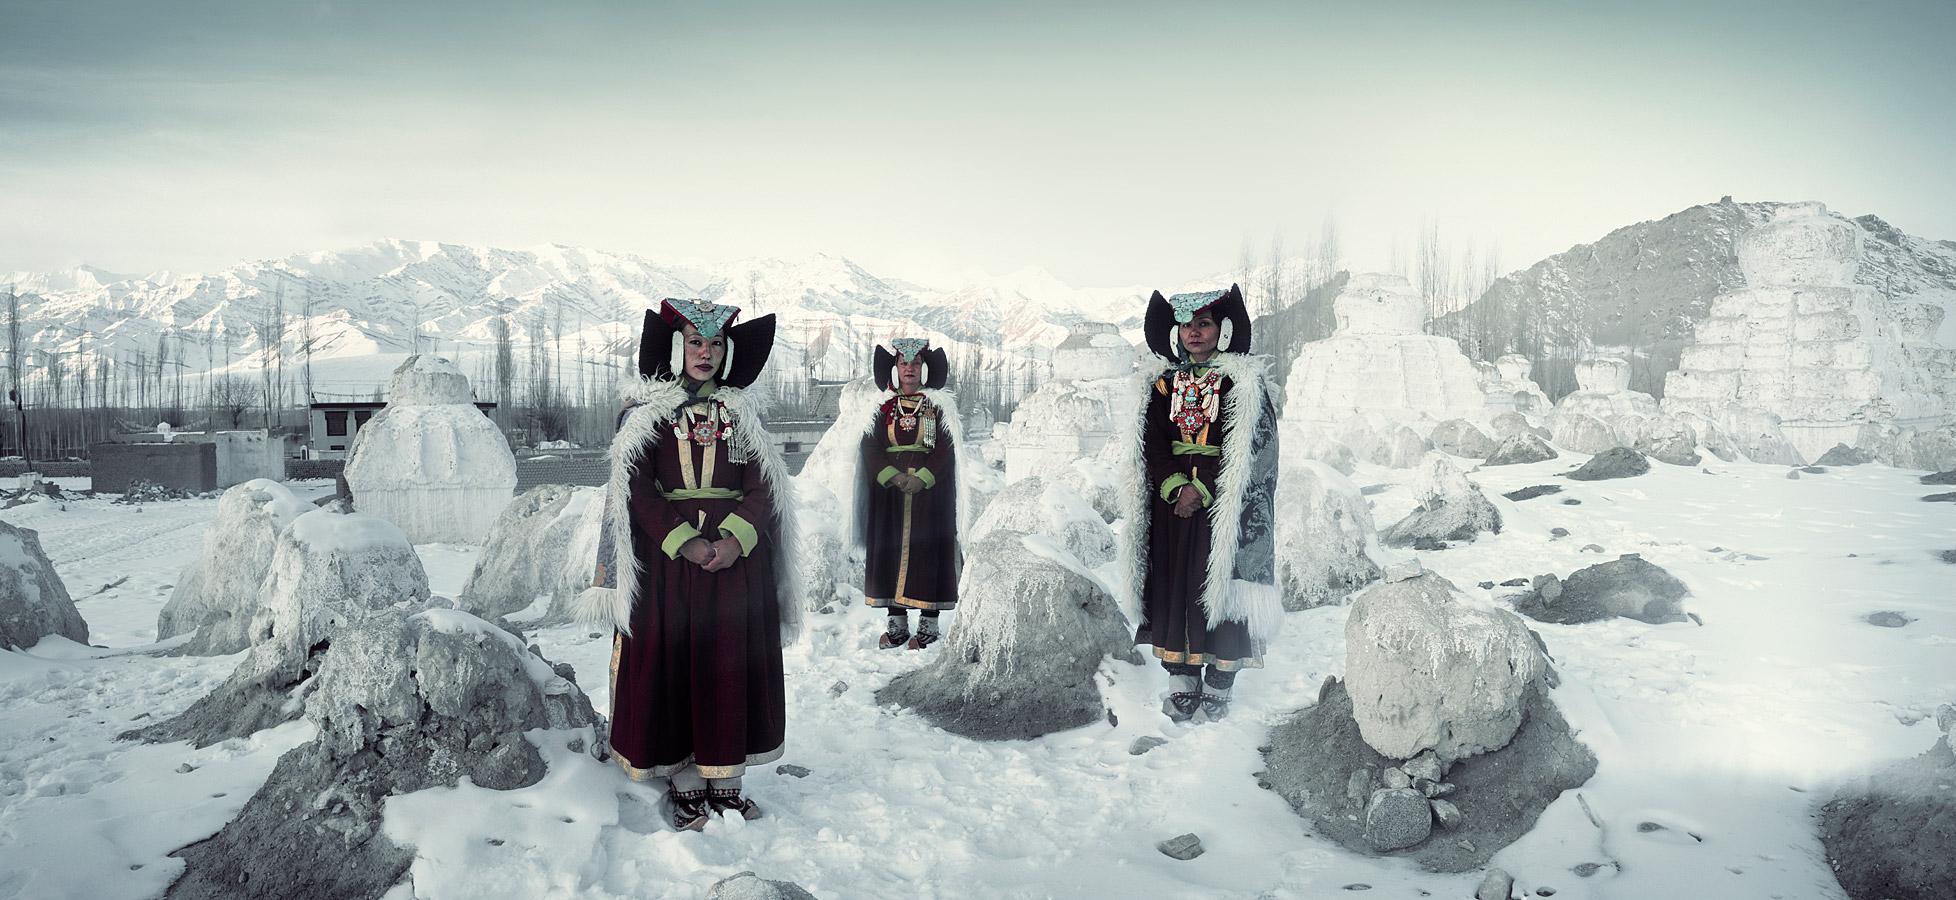 Jimmy Nelson - VII 280 // VII Ladakh, India, Photography 2012, Printed After